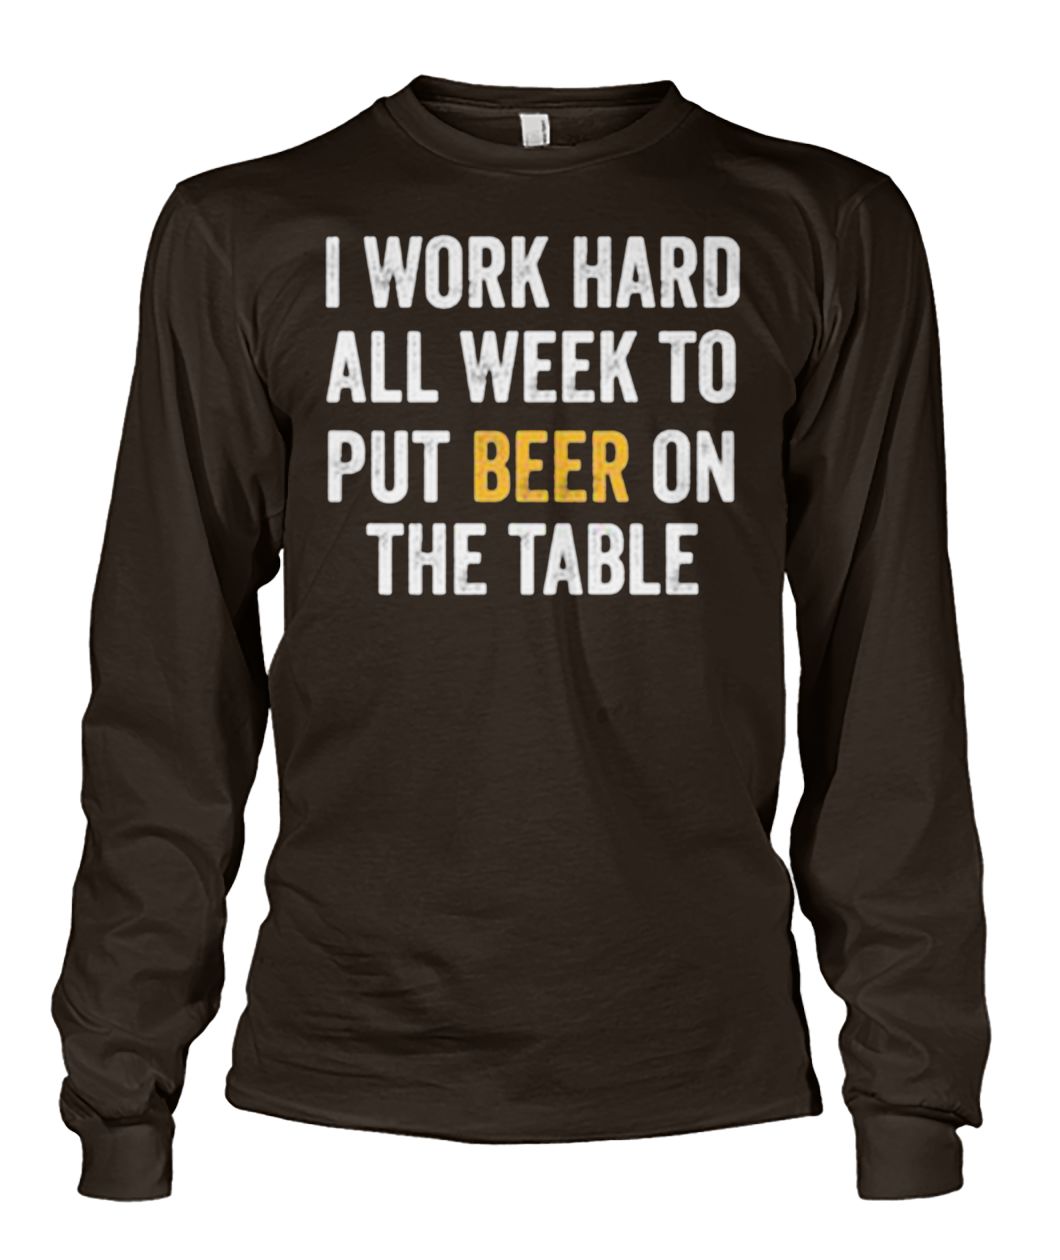 I work hard all week to put beer on the table unisex long sleeve